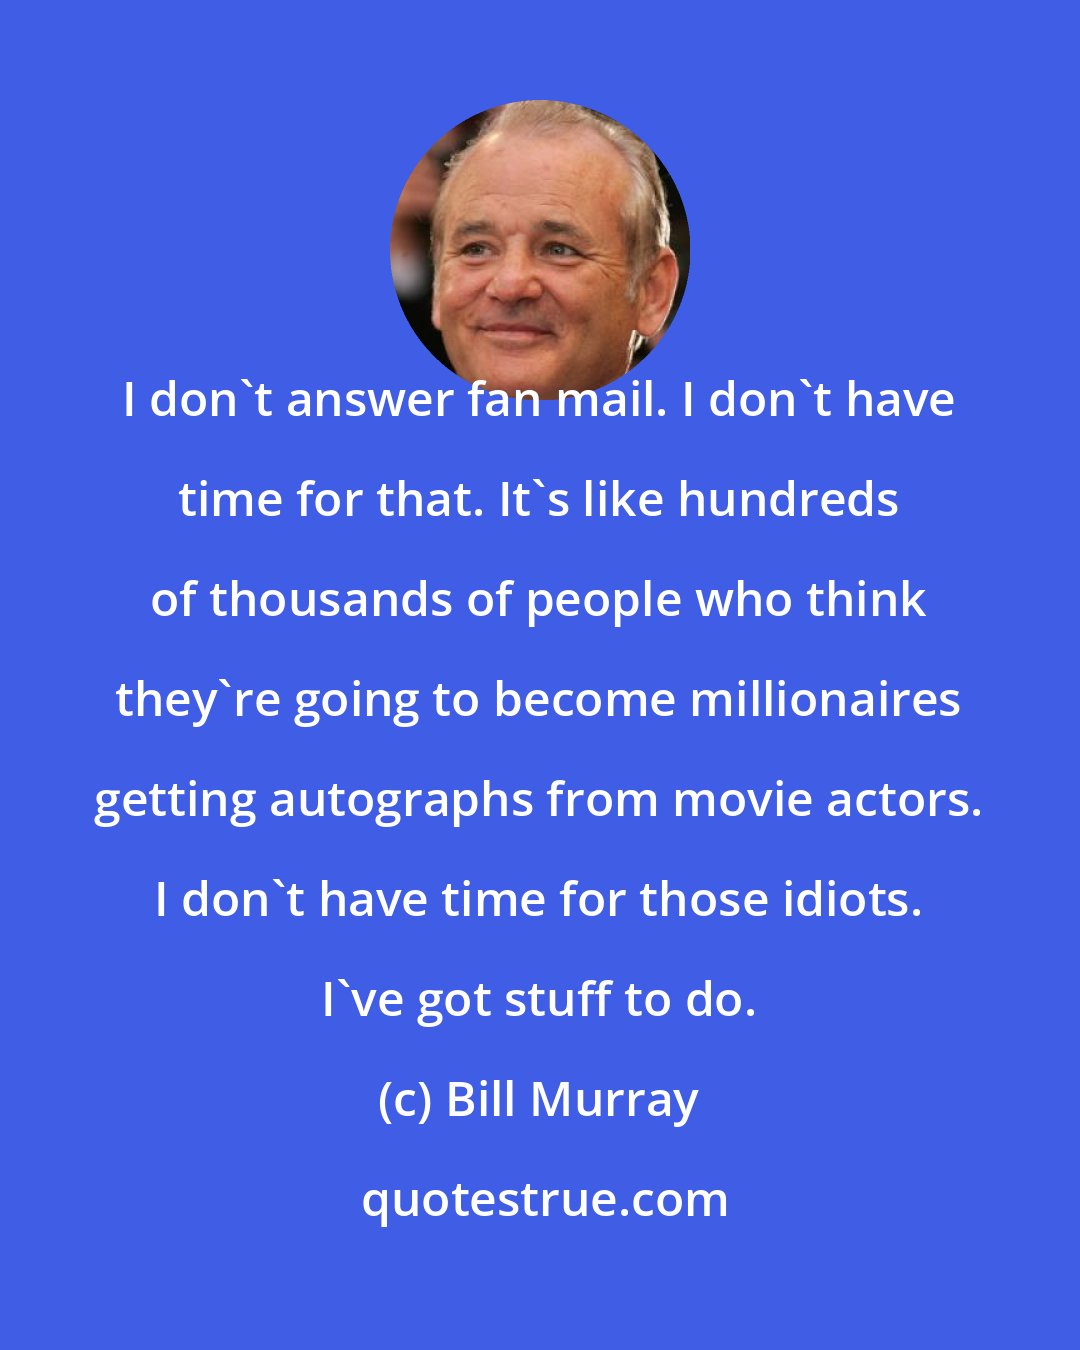 Bill Murray: I don't answer fan mail. I don't have time for that. It's like hundreds of thousands of people who think they're going to become millionaires getting autographs from movie actors. I don't have time for those idiots. I've got stuff to do.